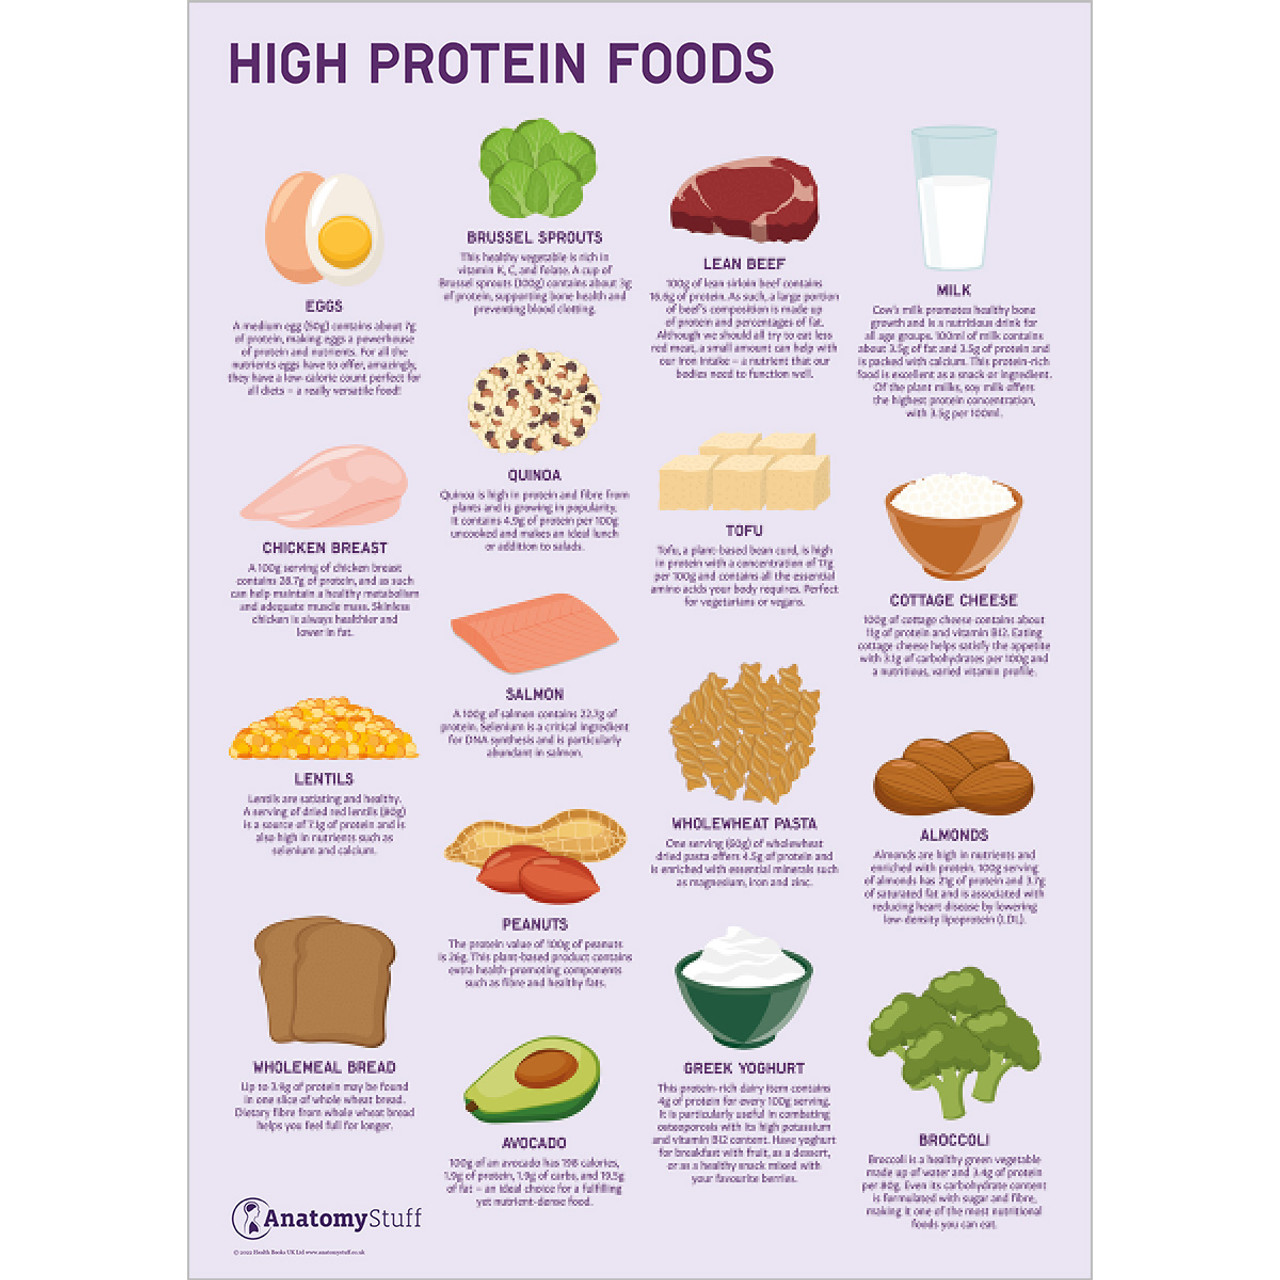 High Protein Foods New Poster Web Image  45537.1673343561 ?c=1